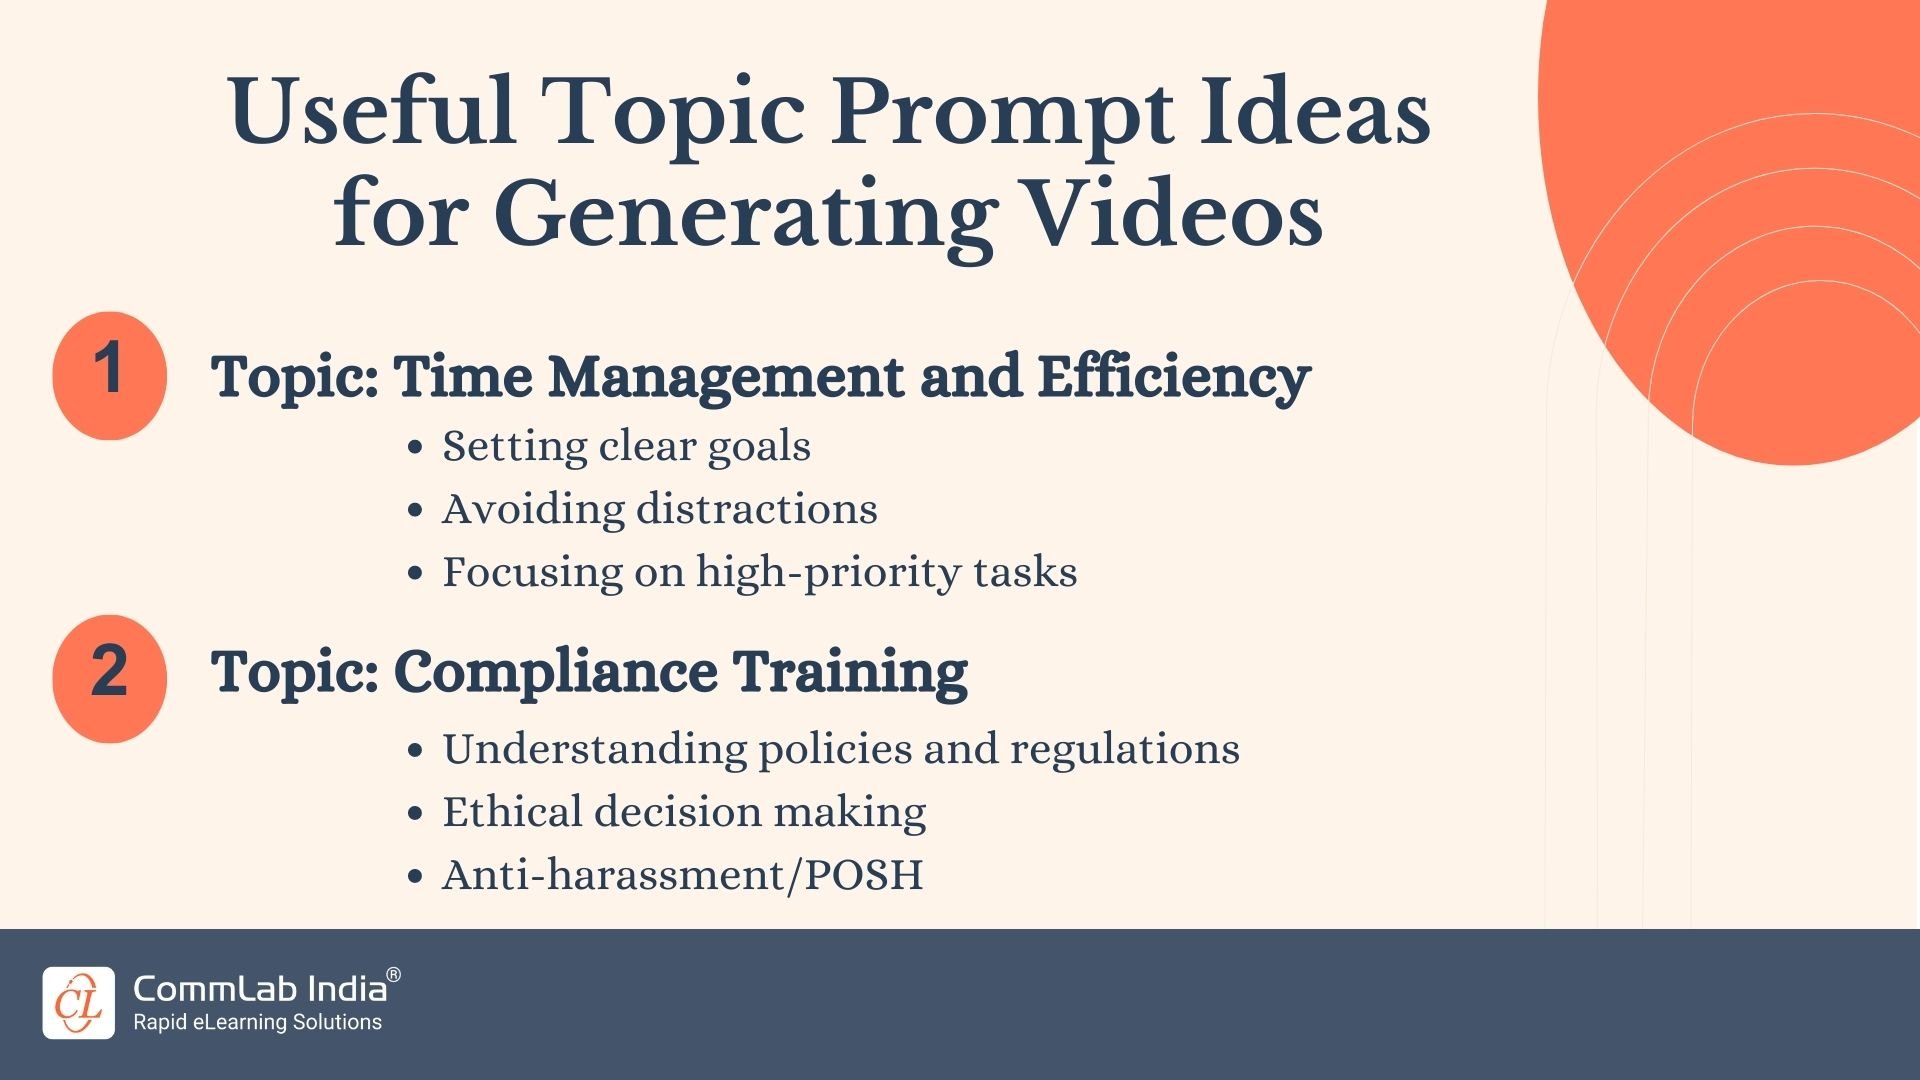 Useful Prompt Ideas for Generating Videos